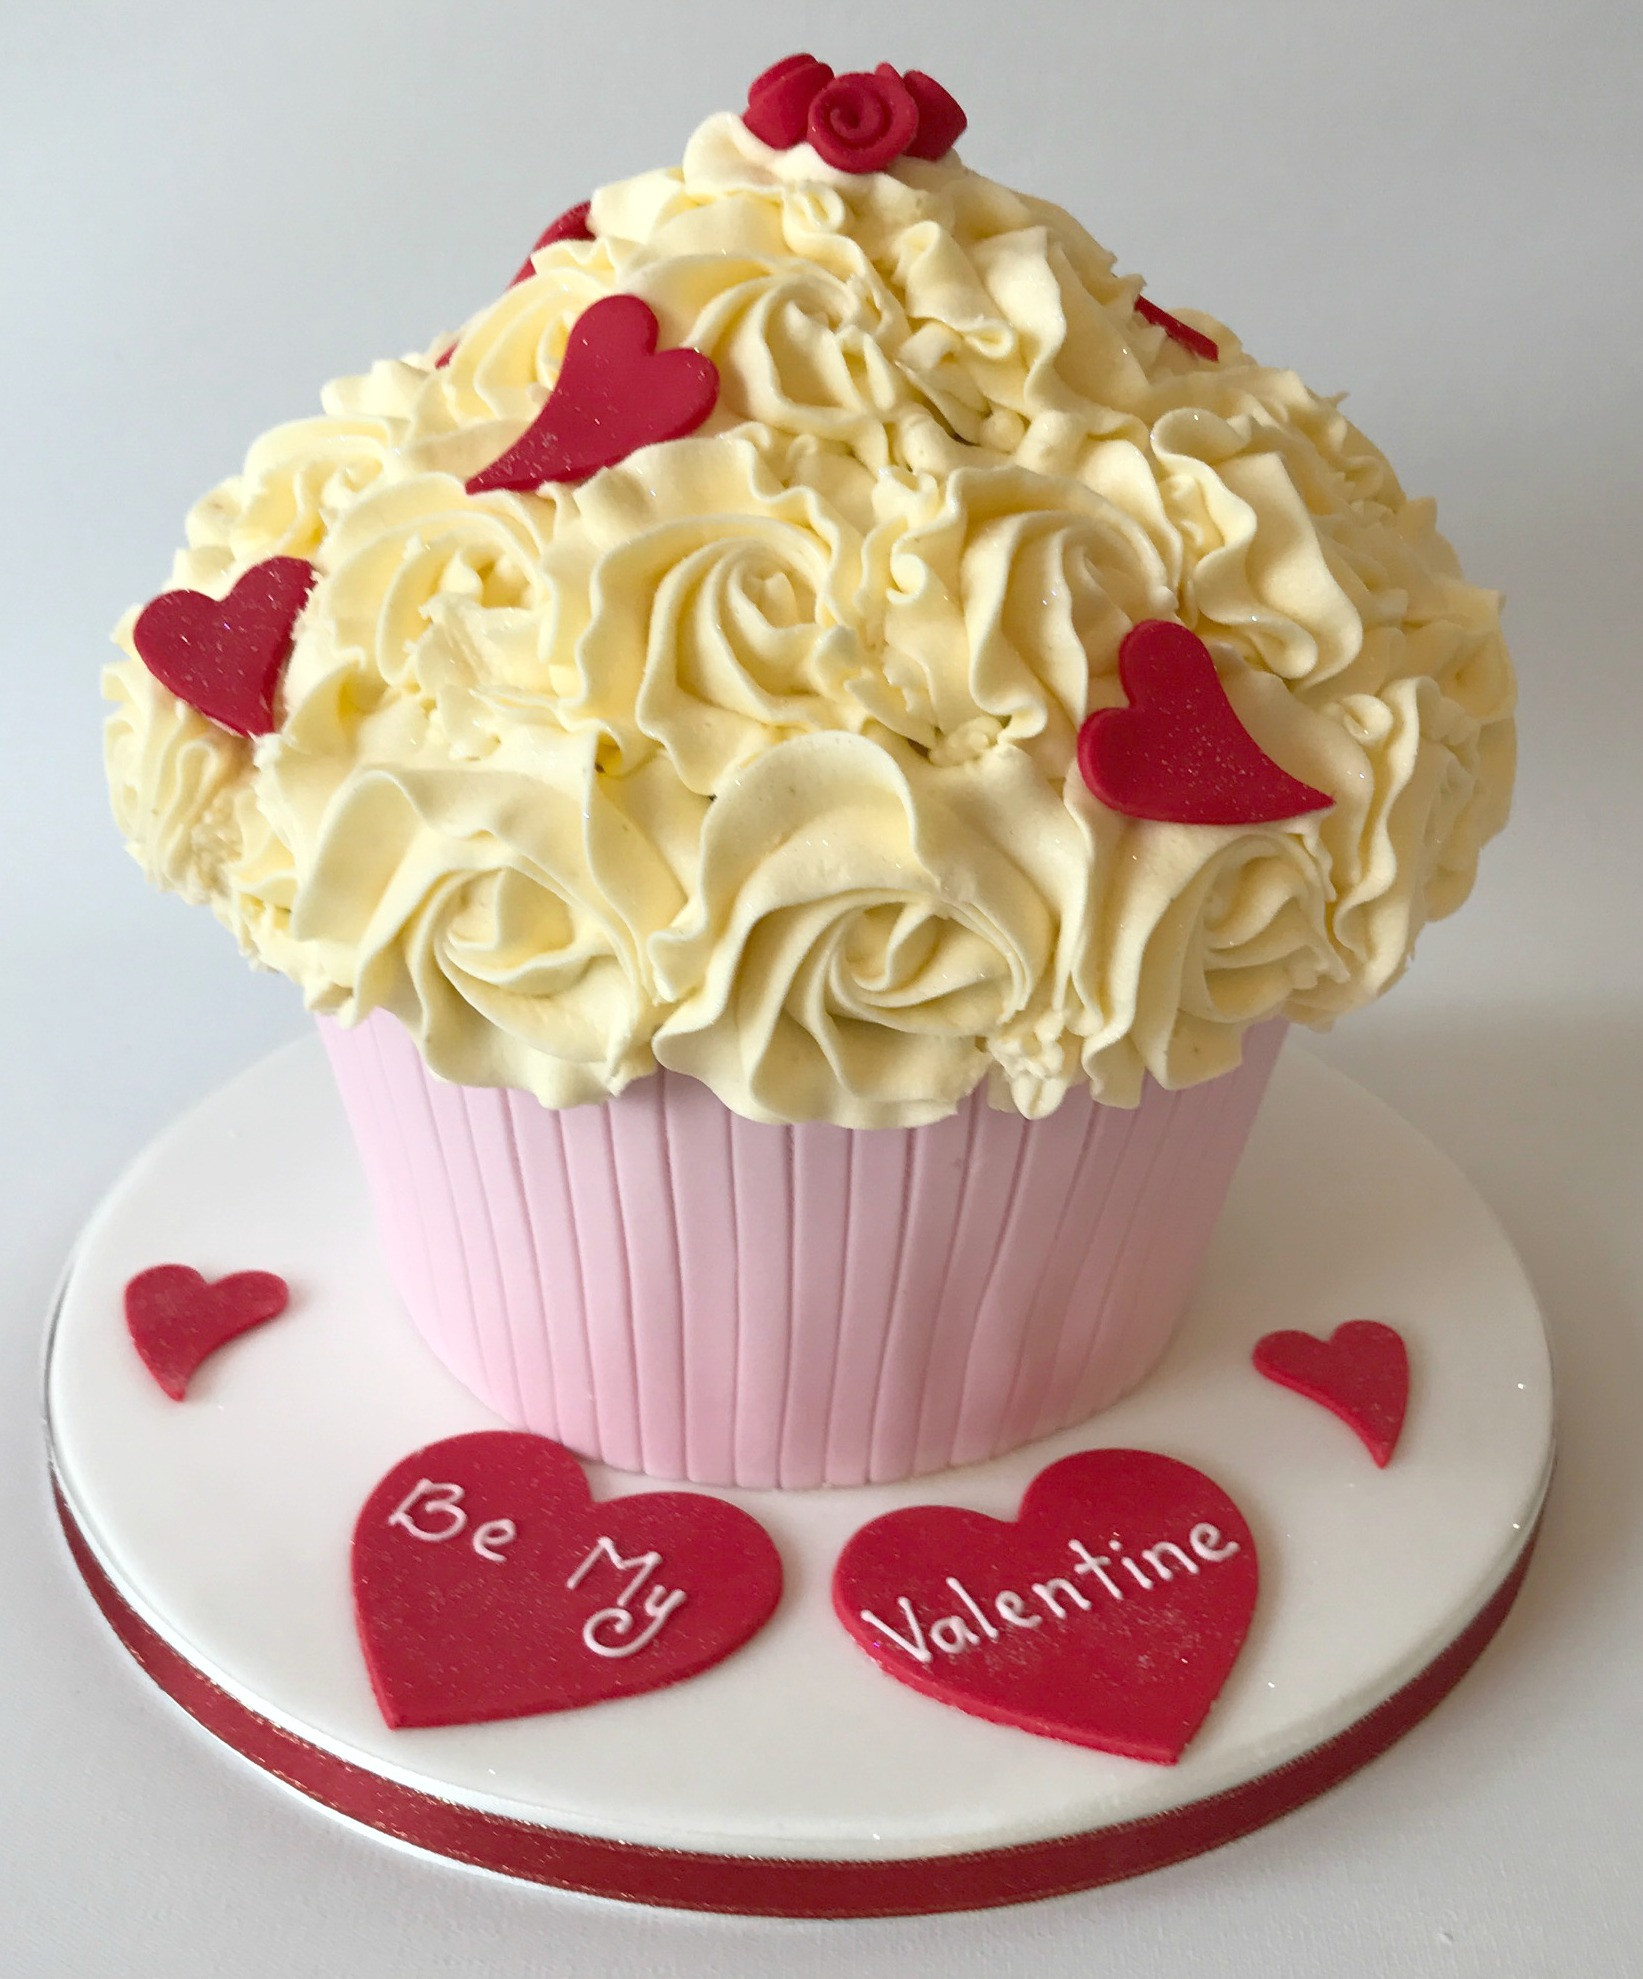 Valentines Day Cakes And Cupcakes
 WIN A Giant Valentines Day Cupcake & Two TNWS Tickets